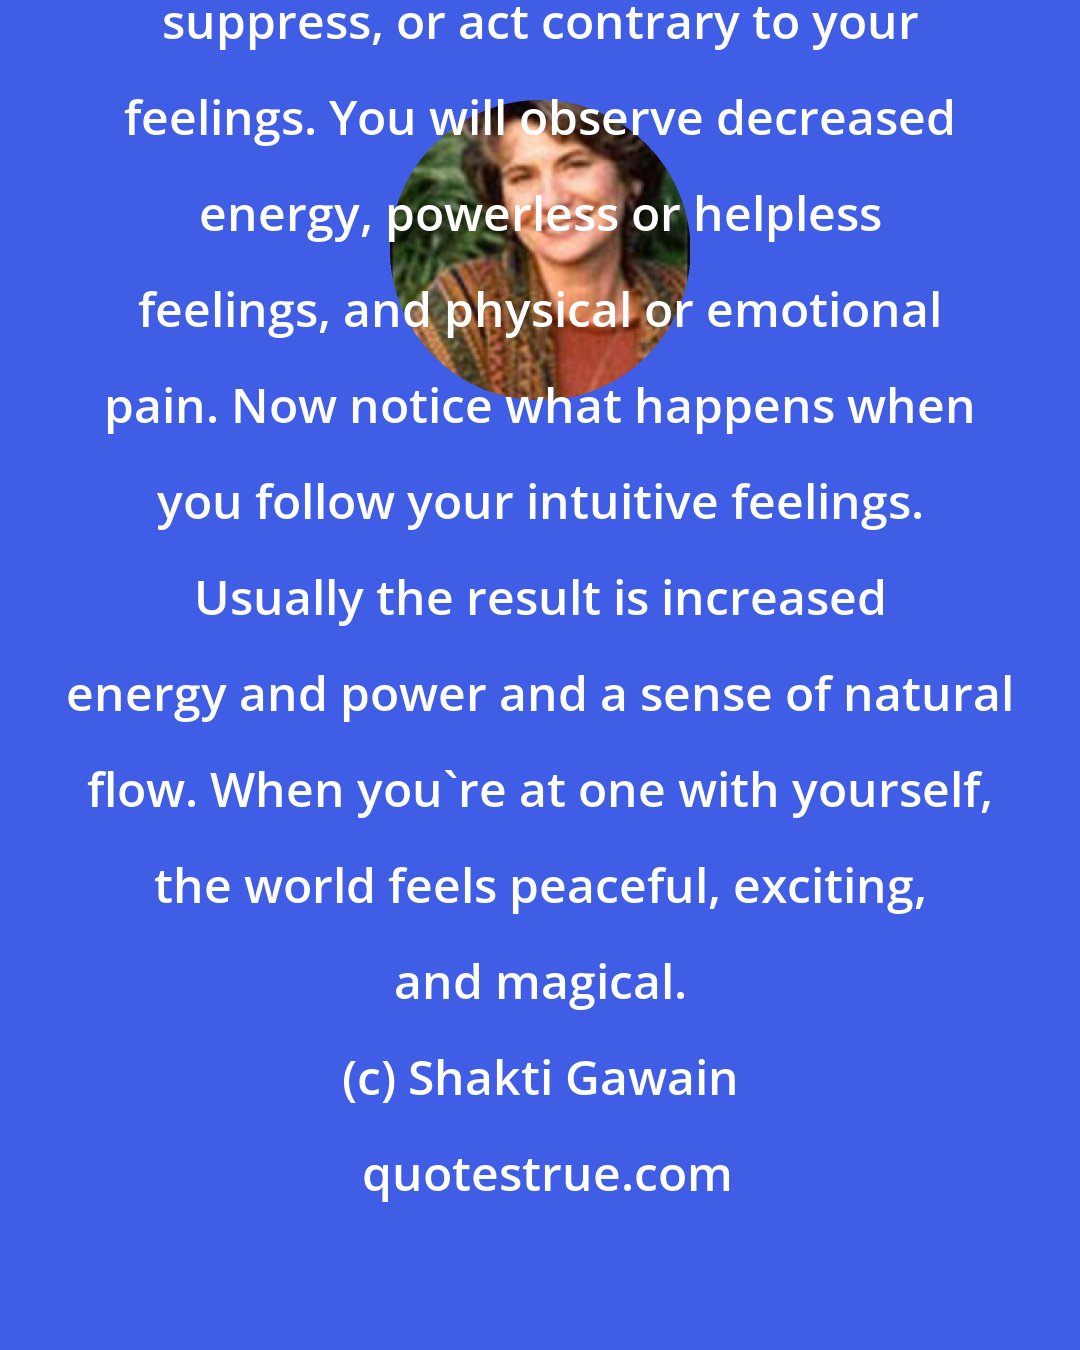 Shakti Gawain: Notice what happens when you doubt, suppress, or act contrary to your feelings. You will observe decreased energy, powerless or helpless feelings, and physical or emotional pain. Now notice what happens when you follow your intuitive feelings. Usually the result is increased energy and power and a sense of natural flow. When you're at one with yourself, the world feels peaceful, exciting, and magical.